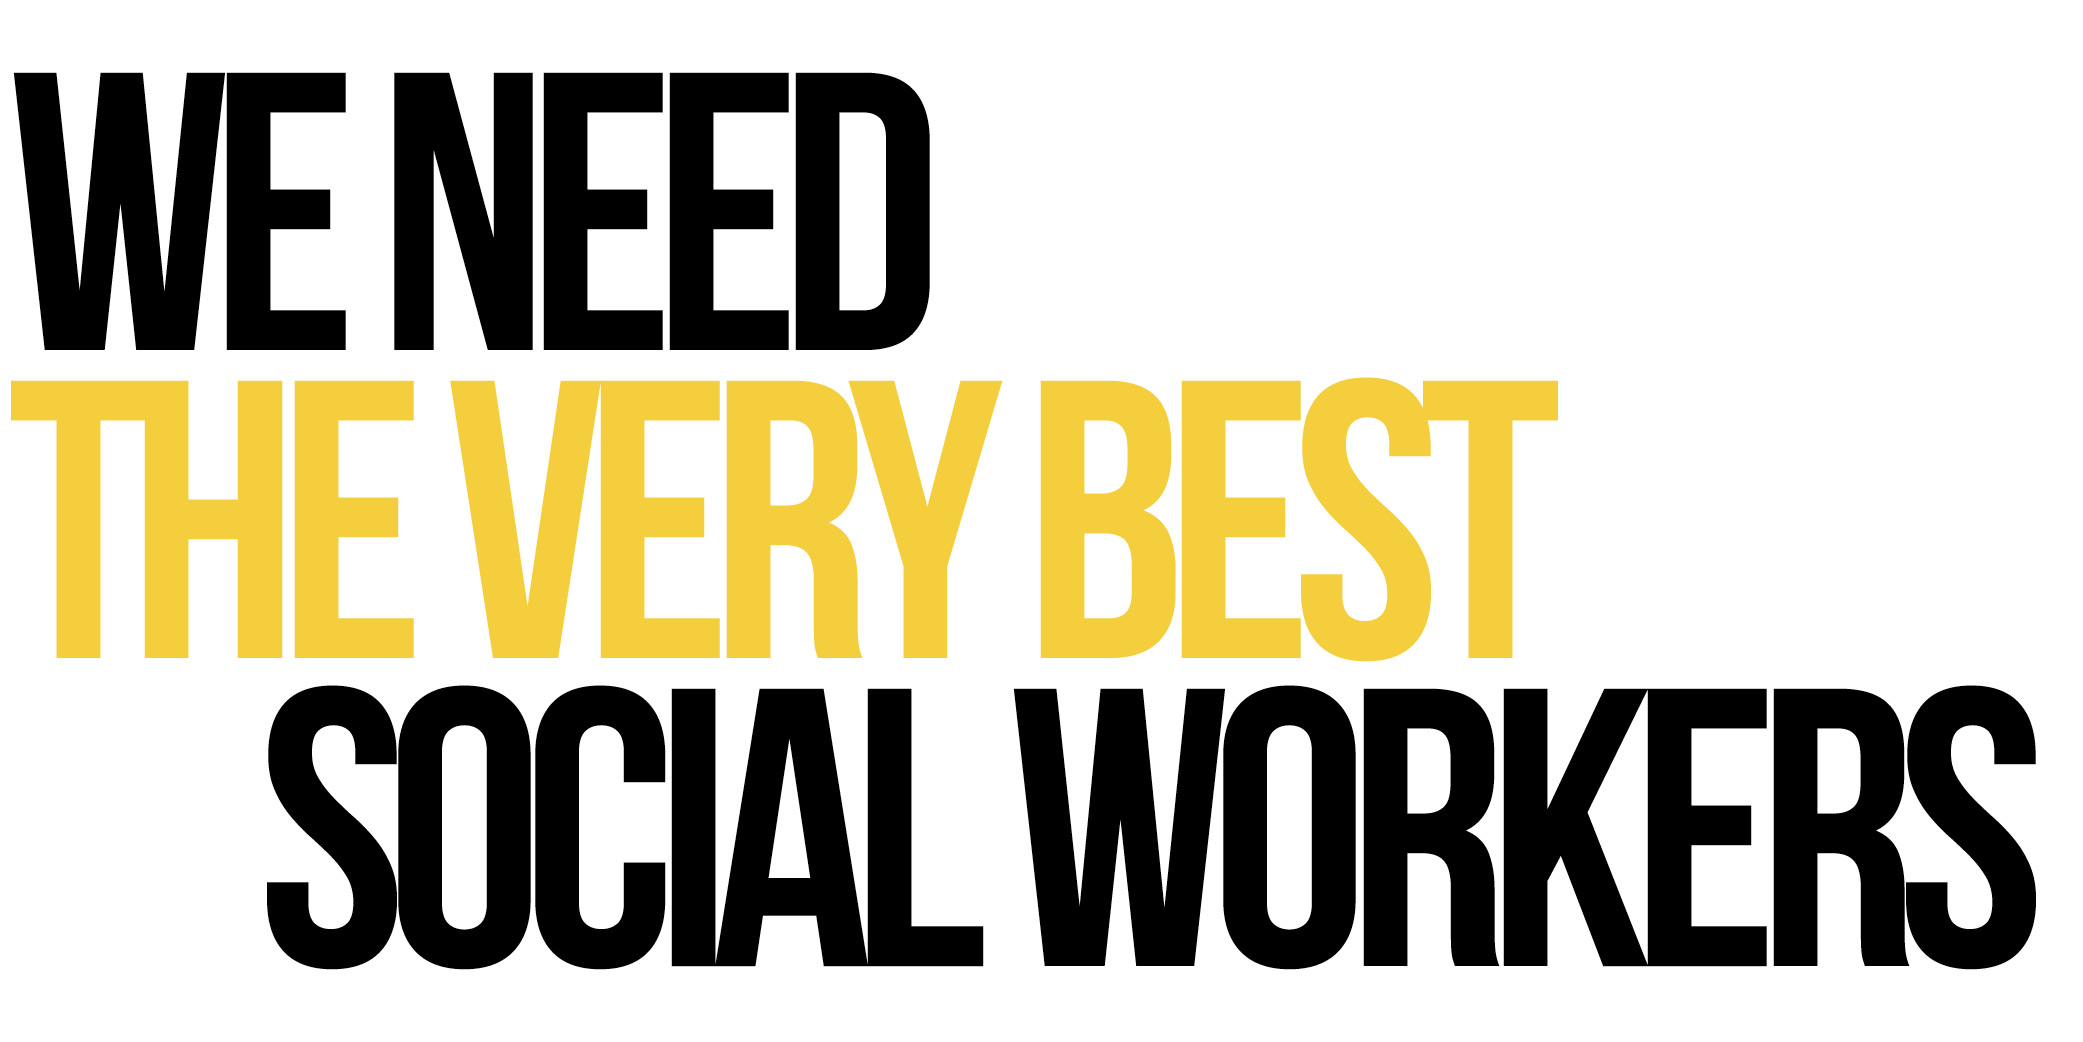 We need the very best social workers